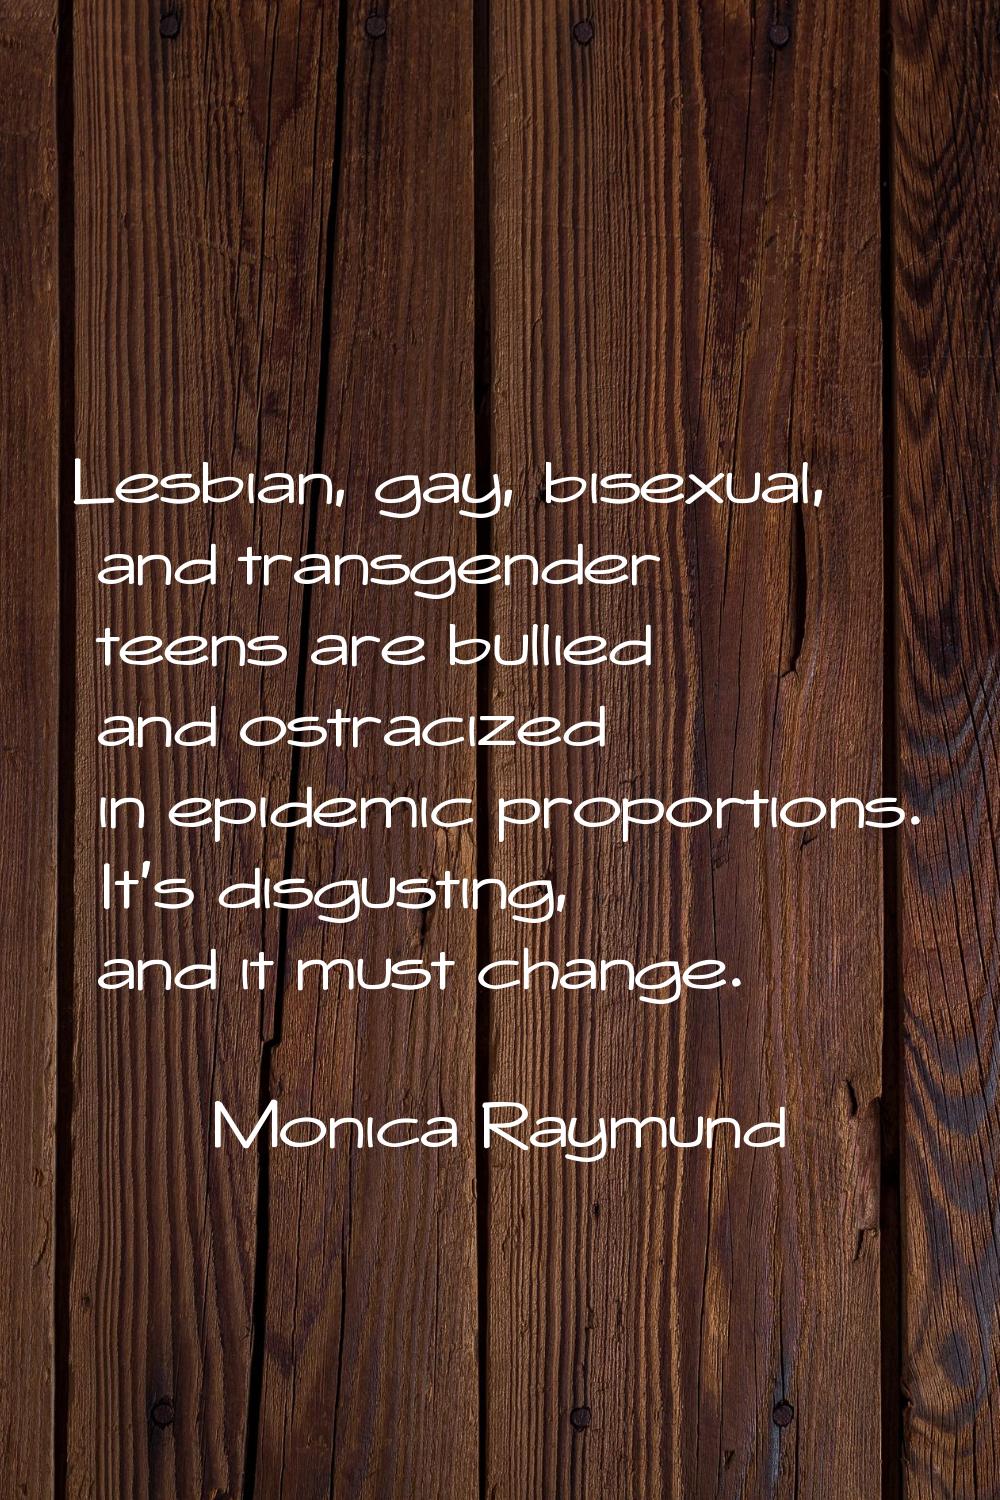 Lesbian, gay, bisexual, and transgender teens are bullied and ostracized in epidemic proportions. I